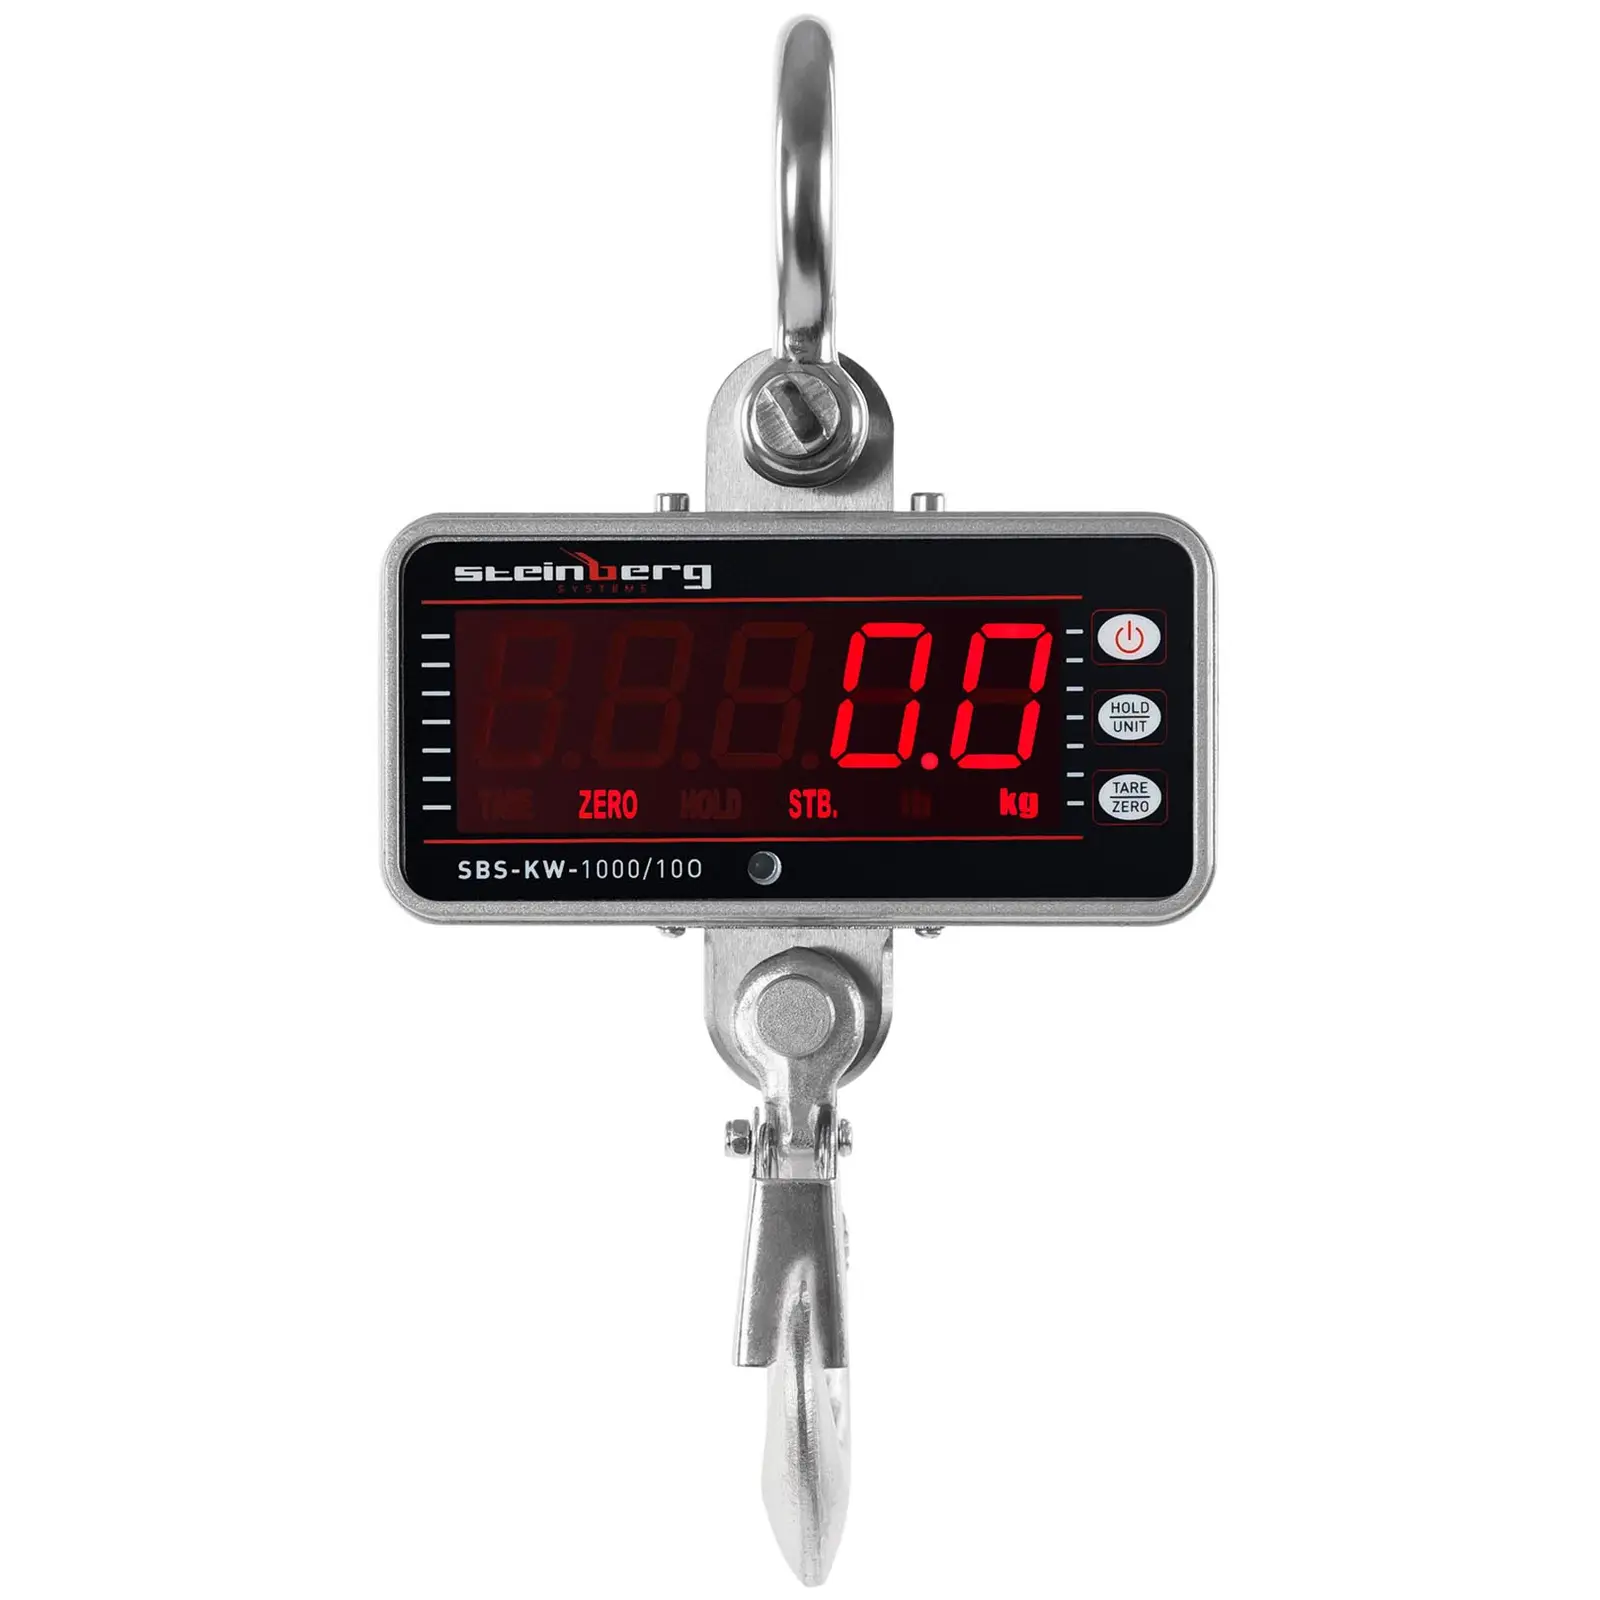 Crane Scale up to 1,000 kg - hanging scale - industrial scale - digital